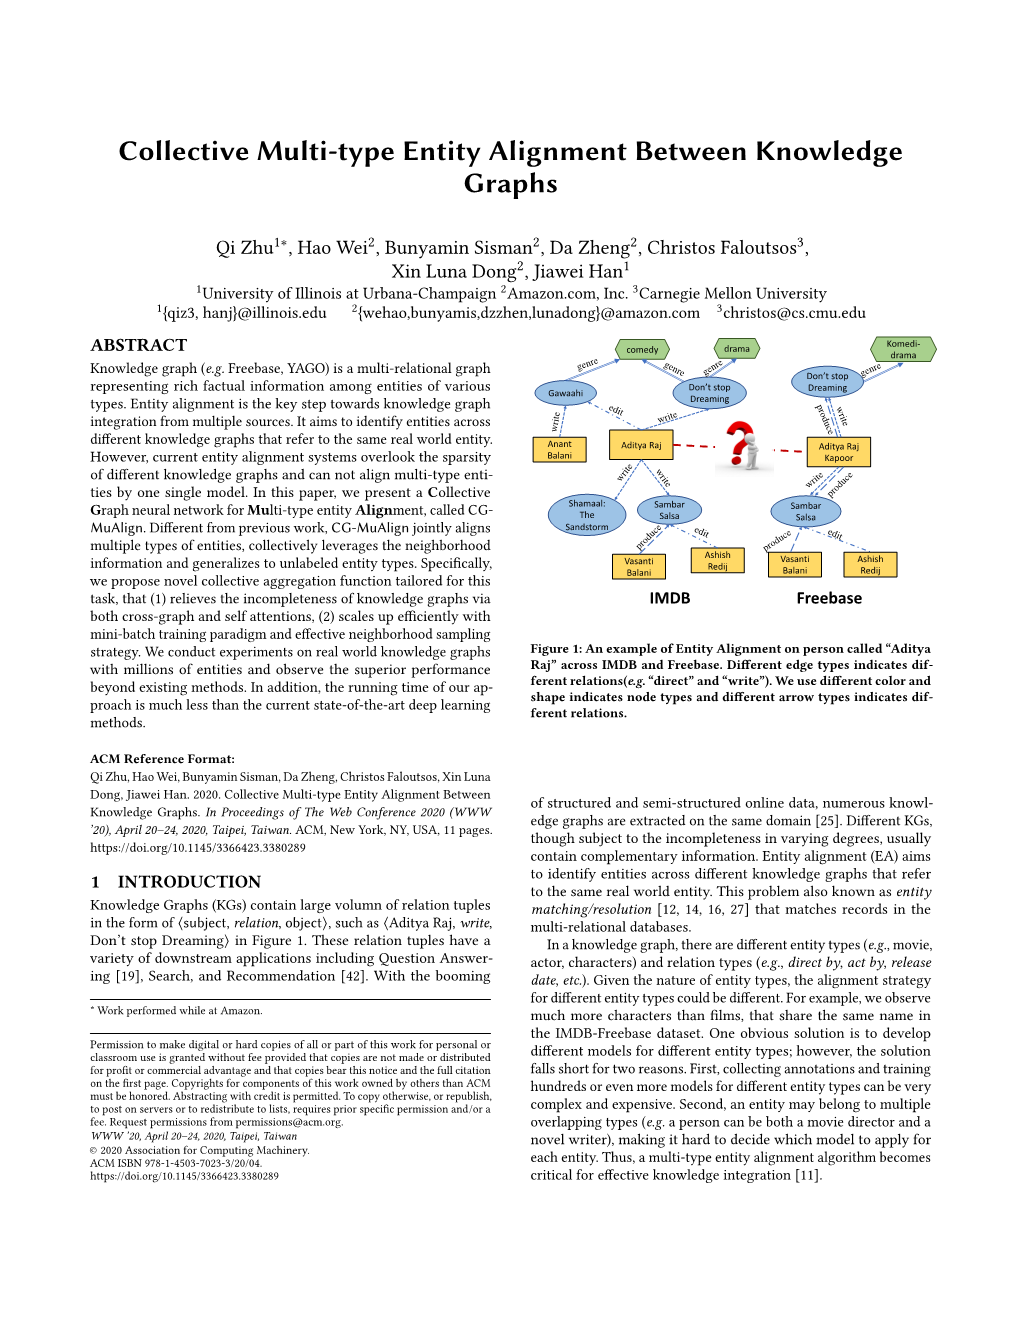 Collective Multi-Type Entity Alignment Between Knowledge Graphs